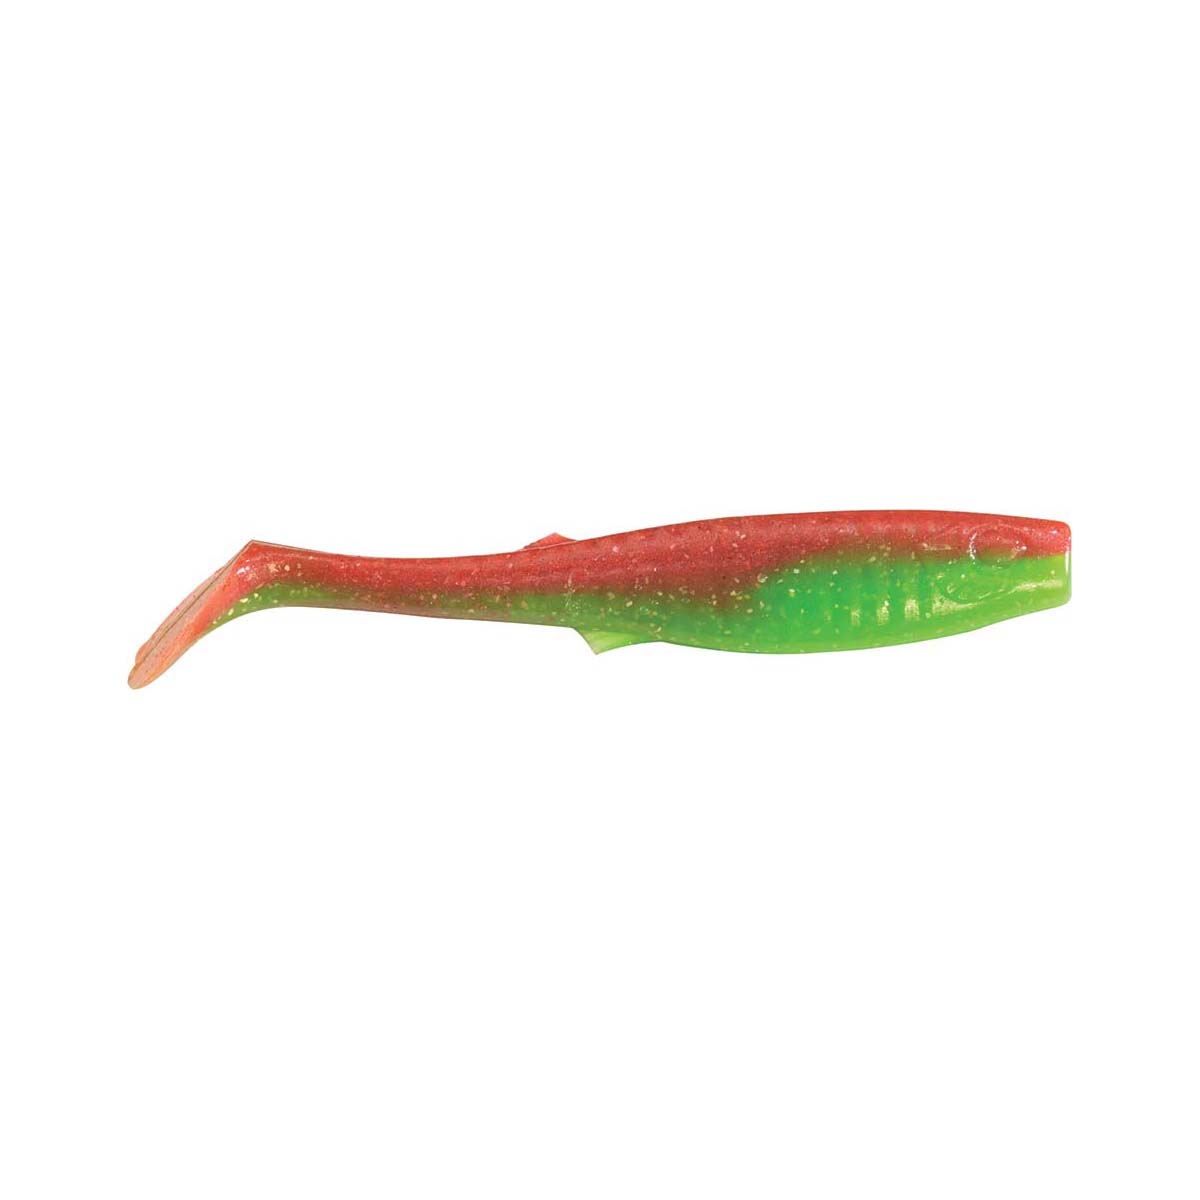 Berkley Gulp! Paddletail Shad Soft Plastic Lure 3in Nuclear Chicken